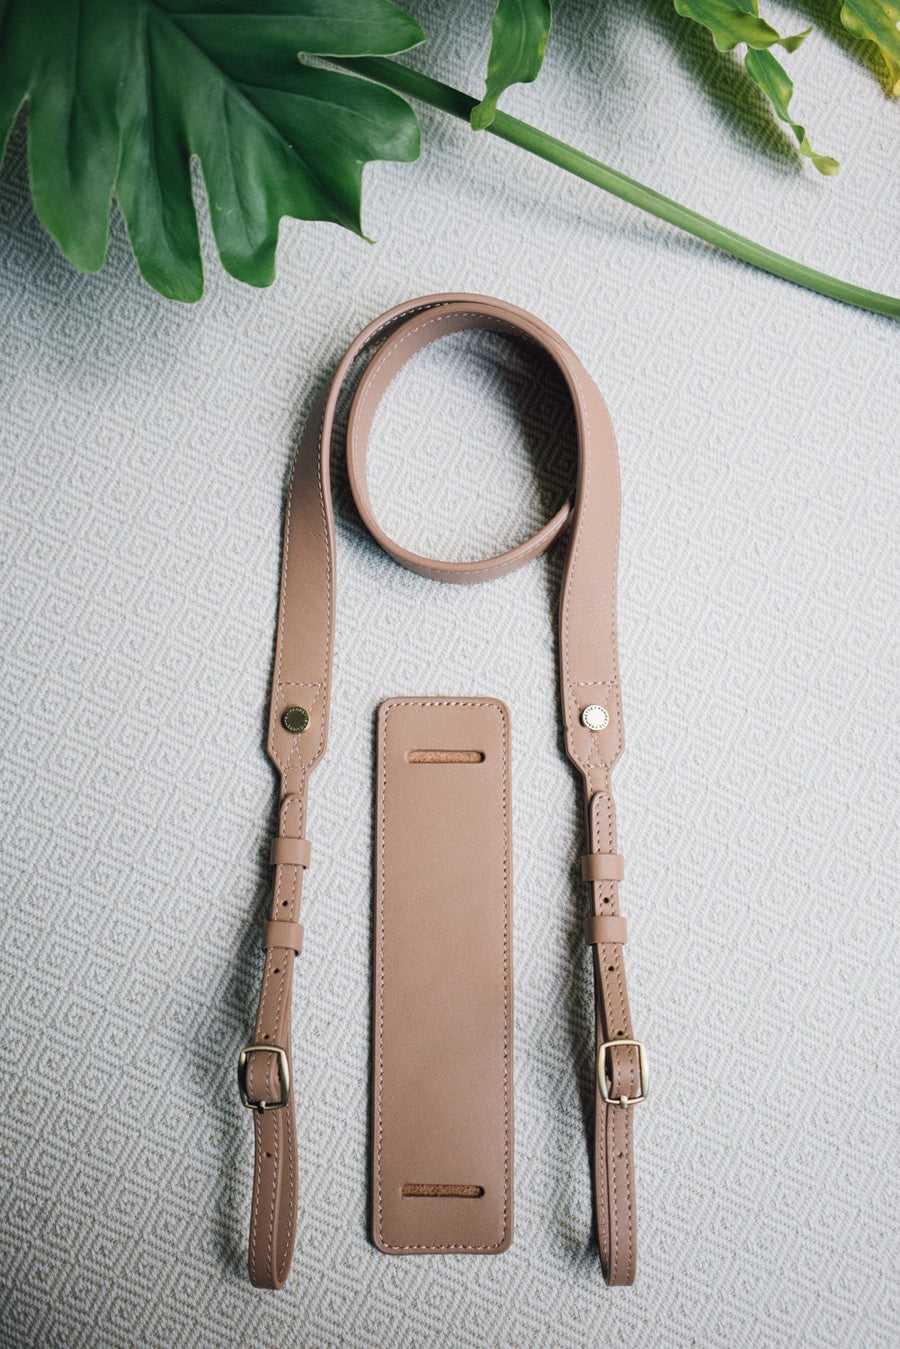 Natural Leather Camera Strap for Photographers